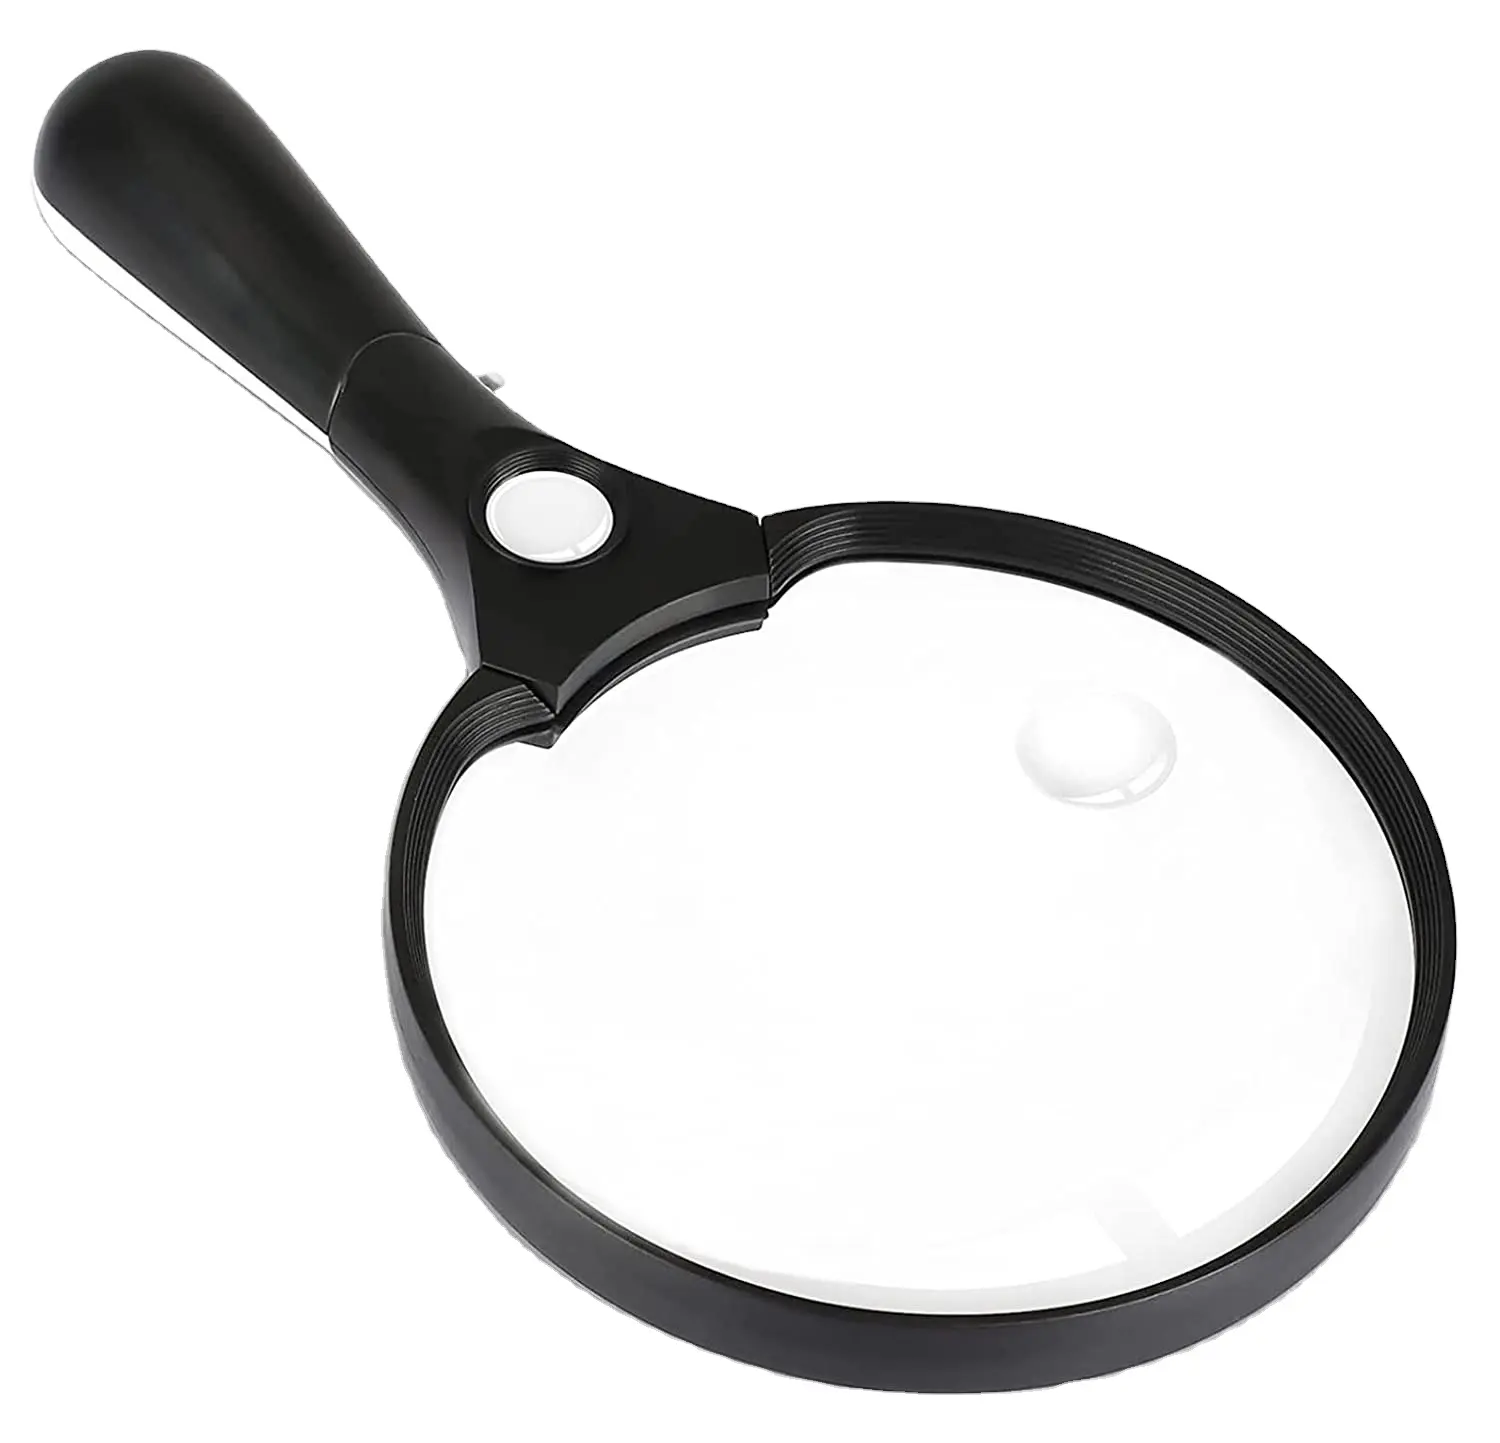 2X 4X 25X Zoom Magnifying Glass Lens 5.5 Inch Large Magnifier with 3 Bright LED Illuminated Lighted Handheld Magnifier